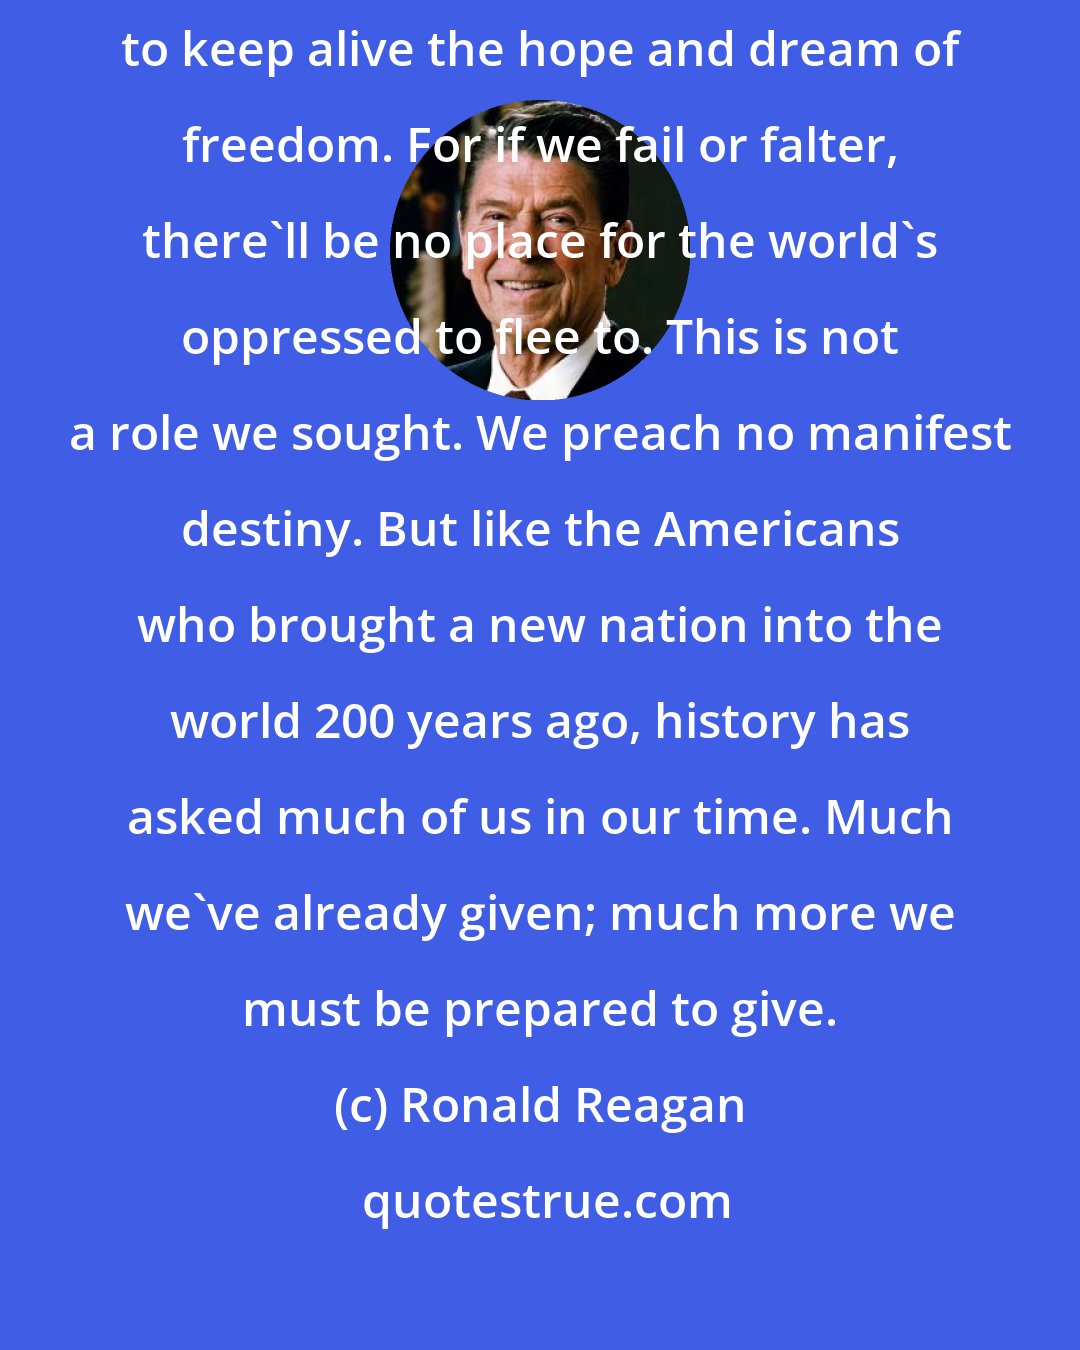 Ronald Reagan: The task that has fallen to us as Americans is to move the conscience of the world, to keep alive the hope and dream of freedom. For if we fail or falter, there'll be no place for the world's oppressed to flee to. This is not a role we sought. We preach no manifest destiny. But like the Americans who brought a new nation into the world 200 years ago, history has asked much of us in our time. Much we've already given; much more we must be prepared to give.